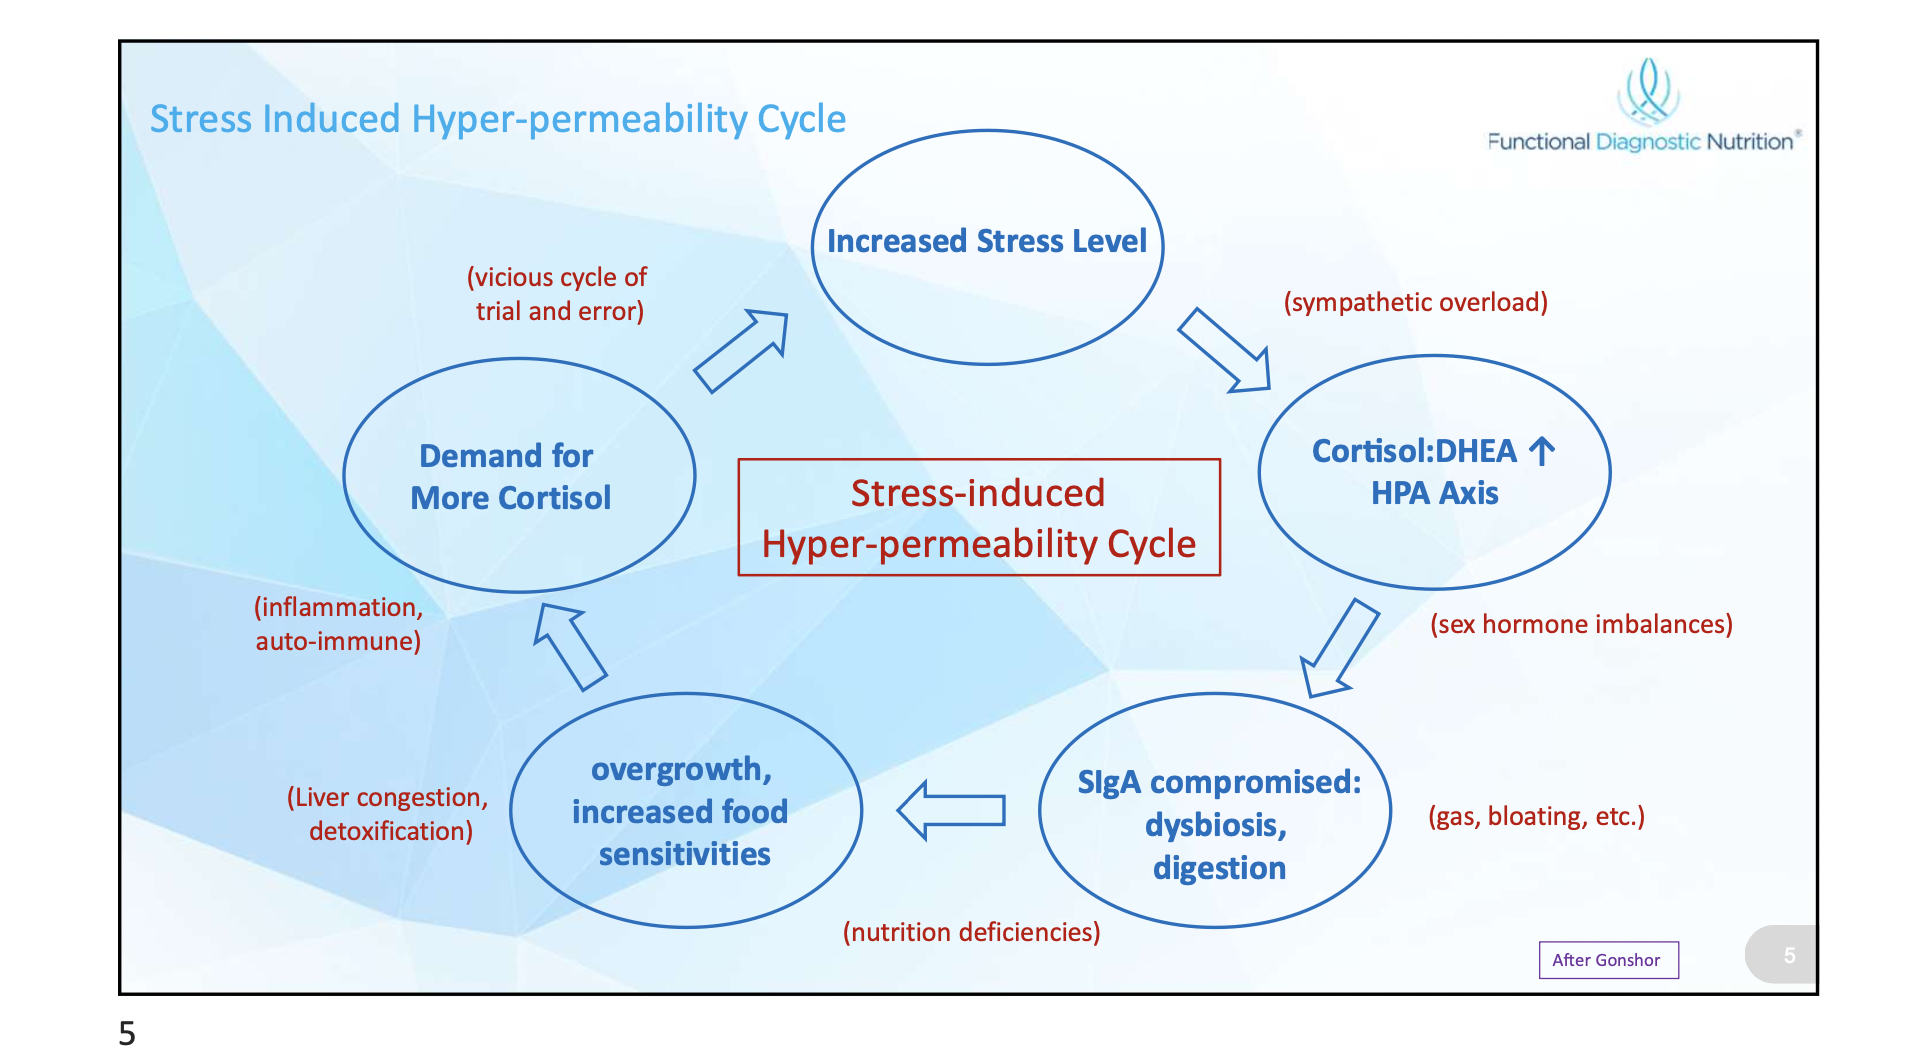 Stress- Induced hyper-premeability cycle, Picture Courtesy of FDN